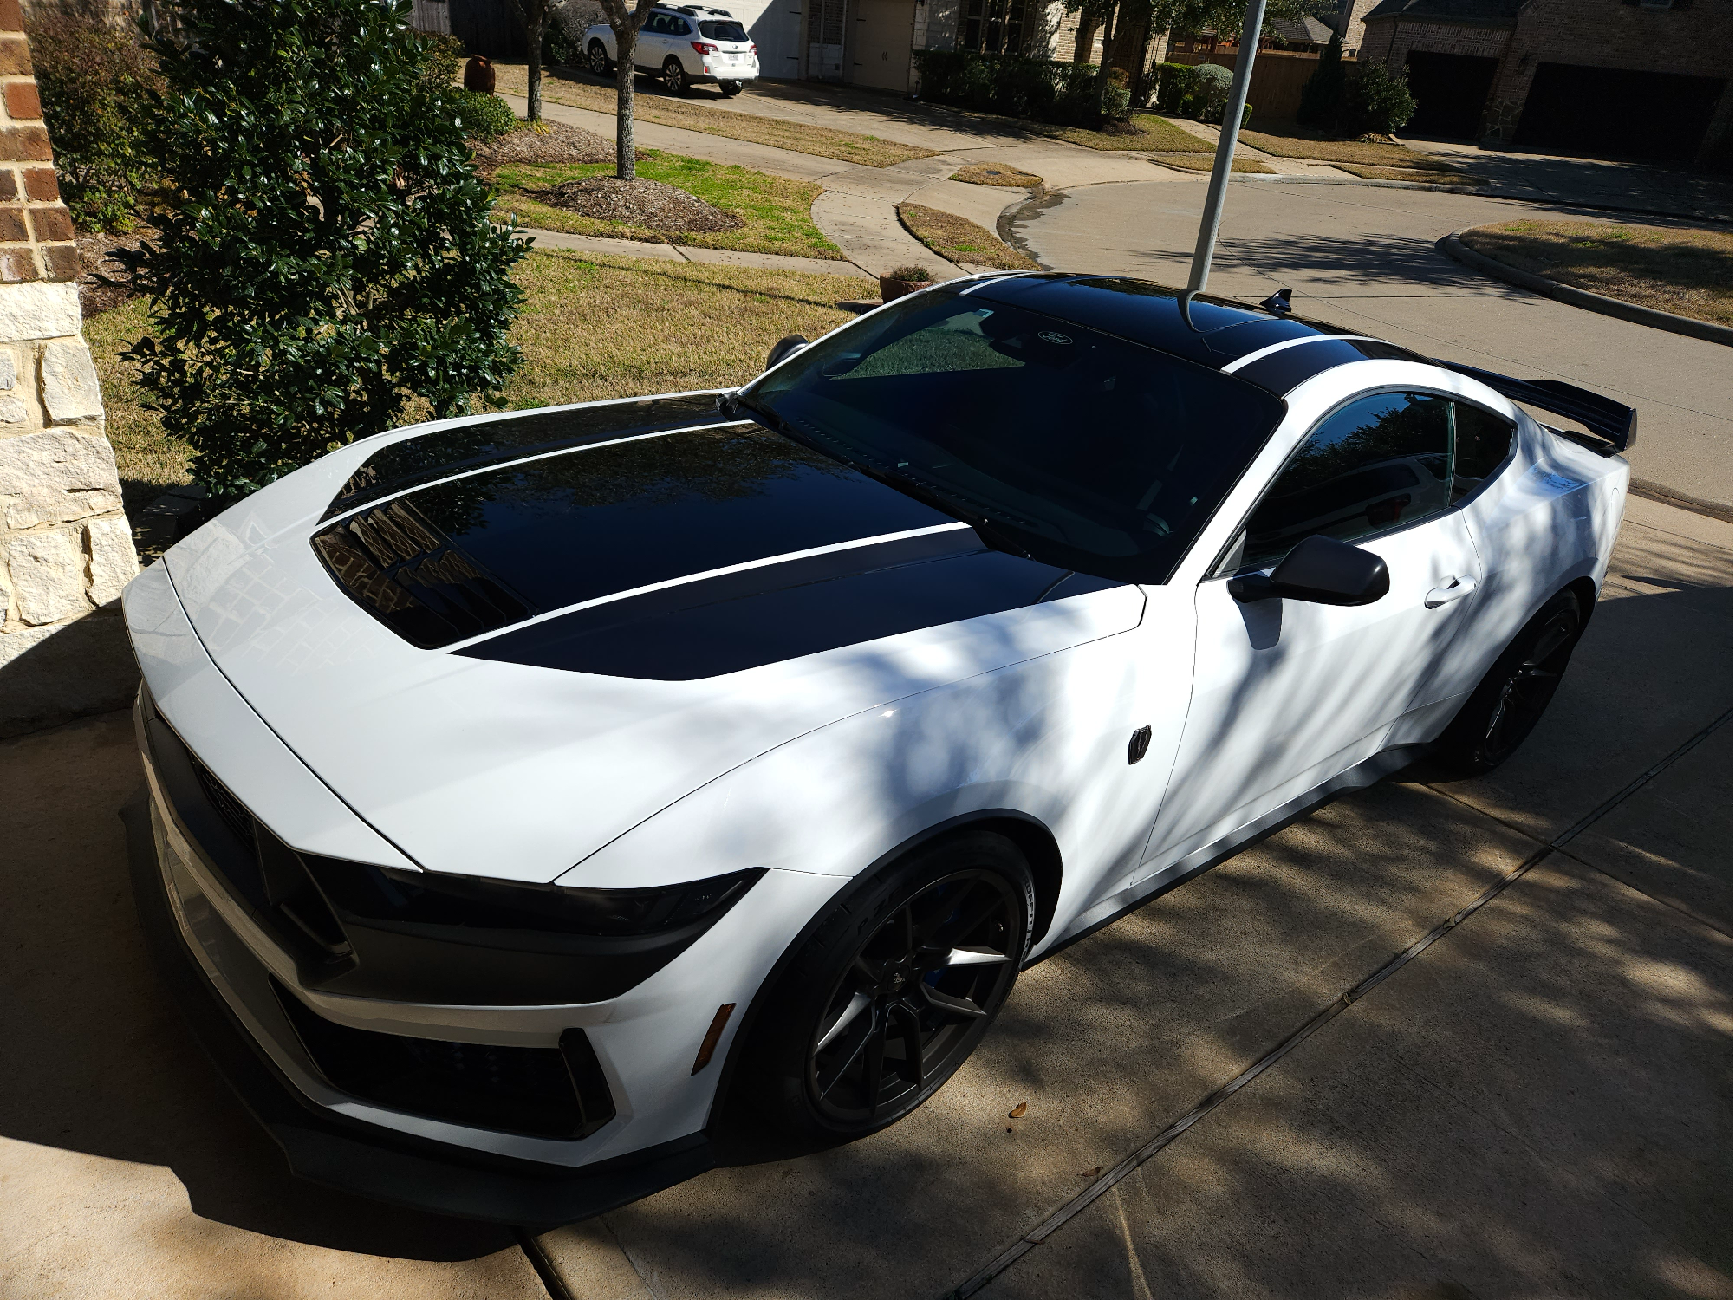 S650 Mustang Thoughts on Paint Protection - Wrap, Ceramic, Teflon,... 20240125_141026